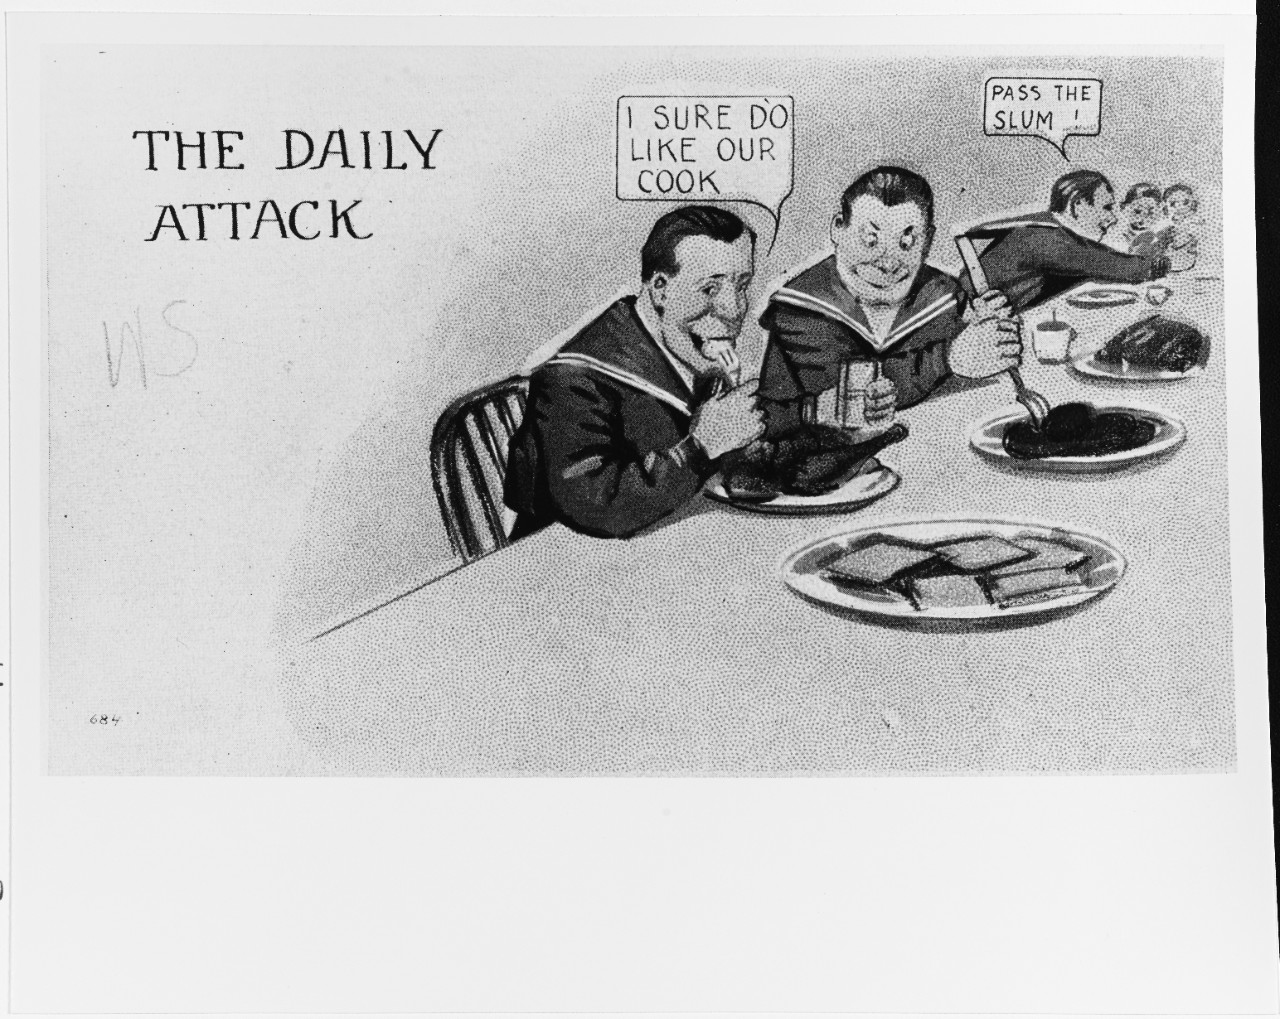 "The Daily Attack"